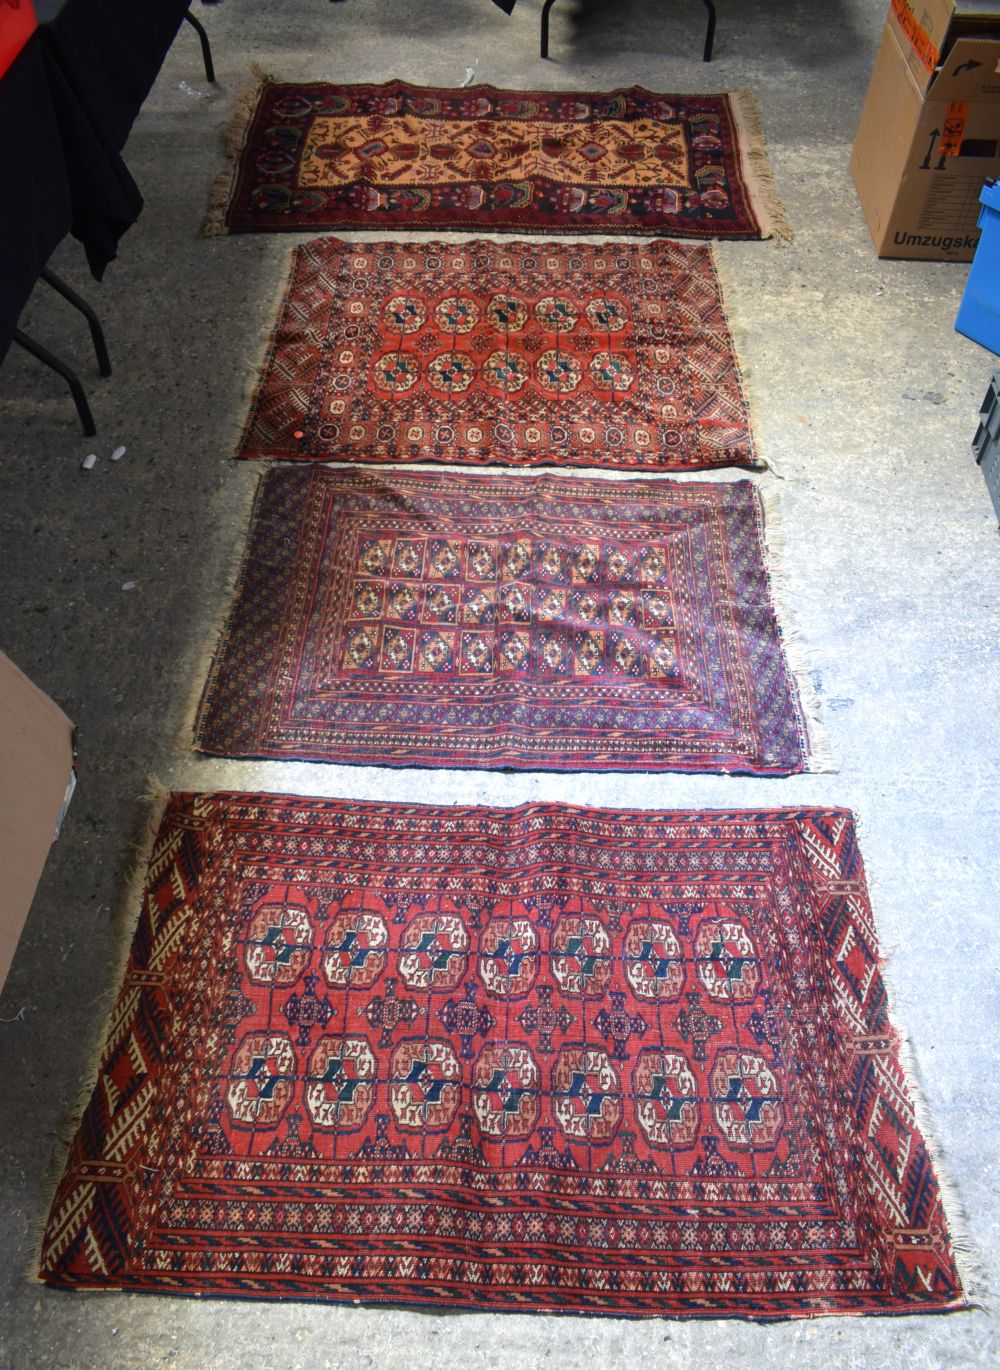 FOUR VINTAGE RUGS in various forms and sizes. (4)